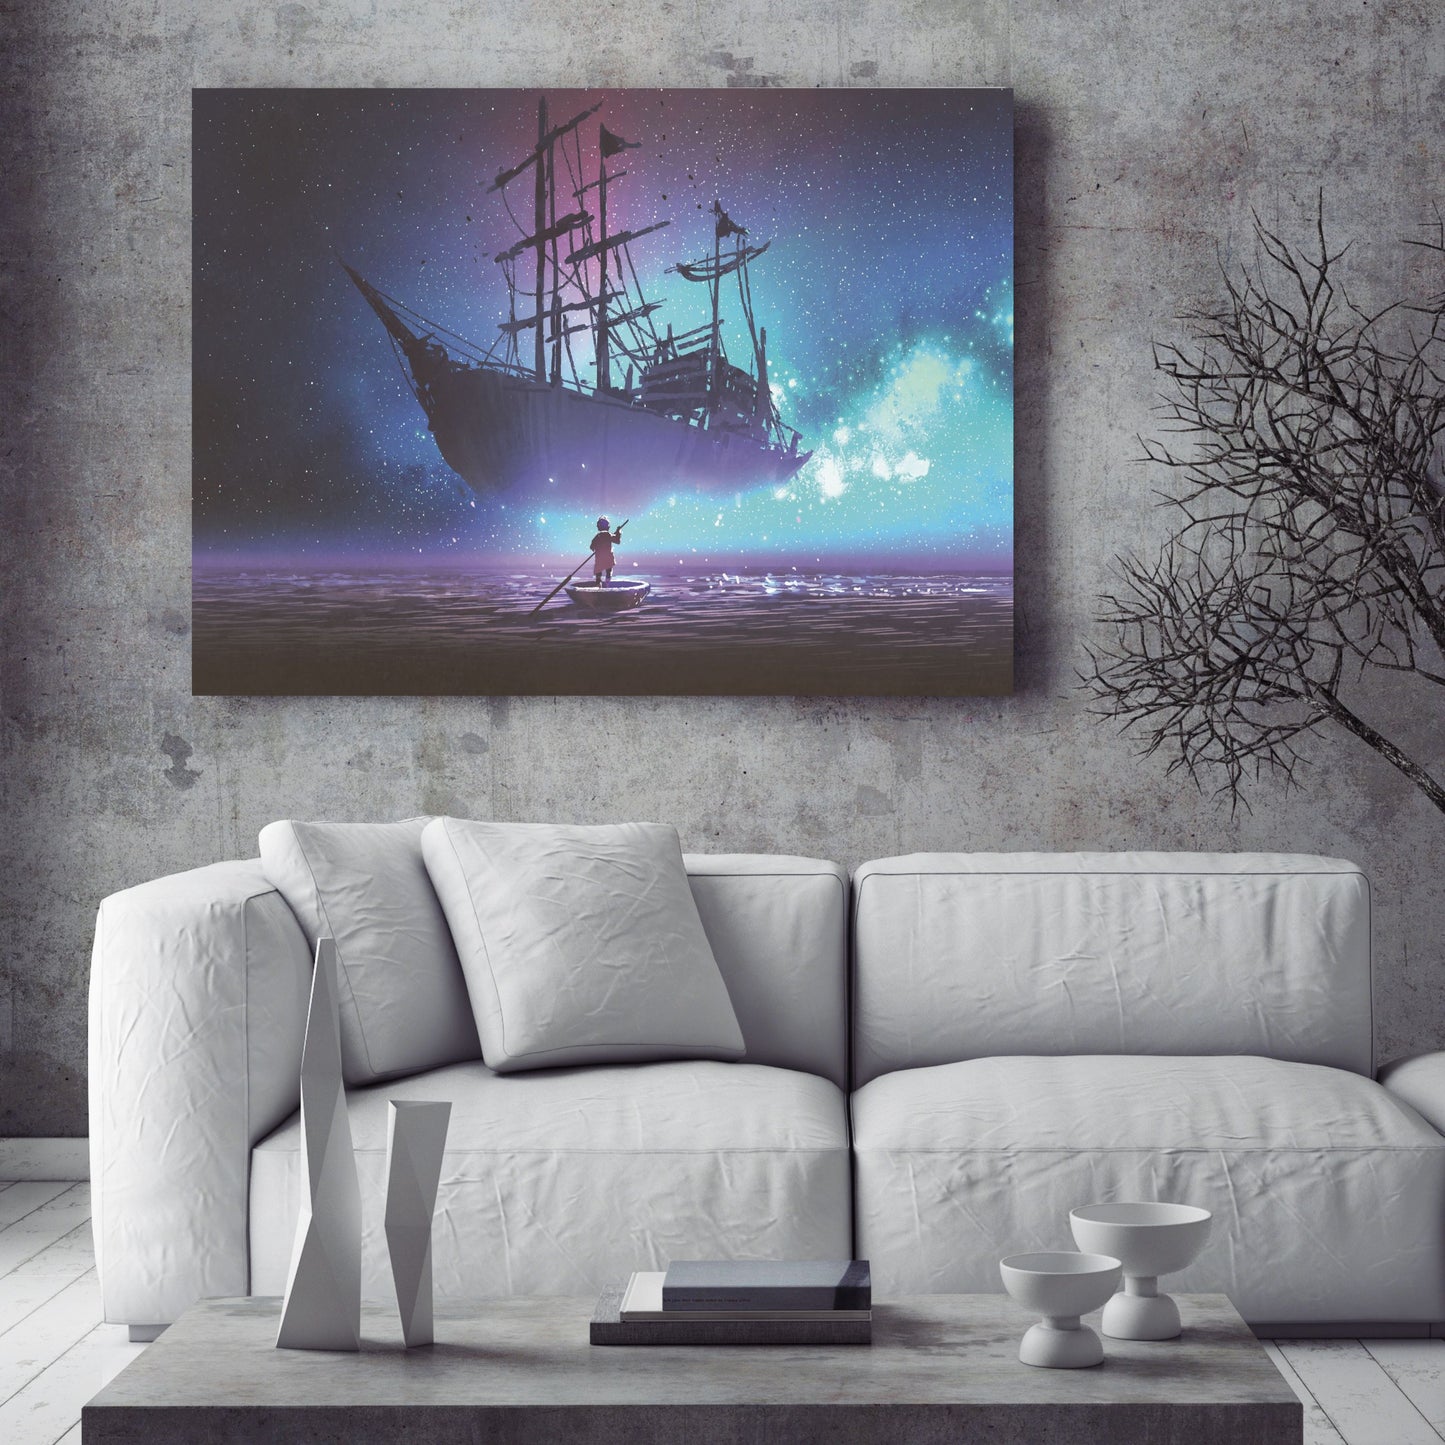 Little boy rowing a boat in the sea and looking at the sailing ship floating in starry sky